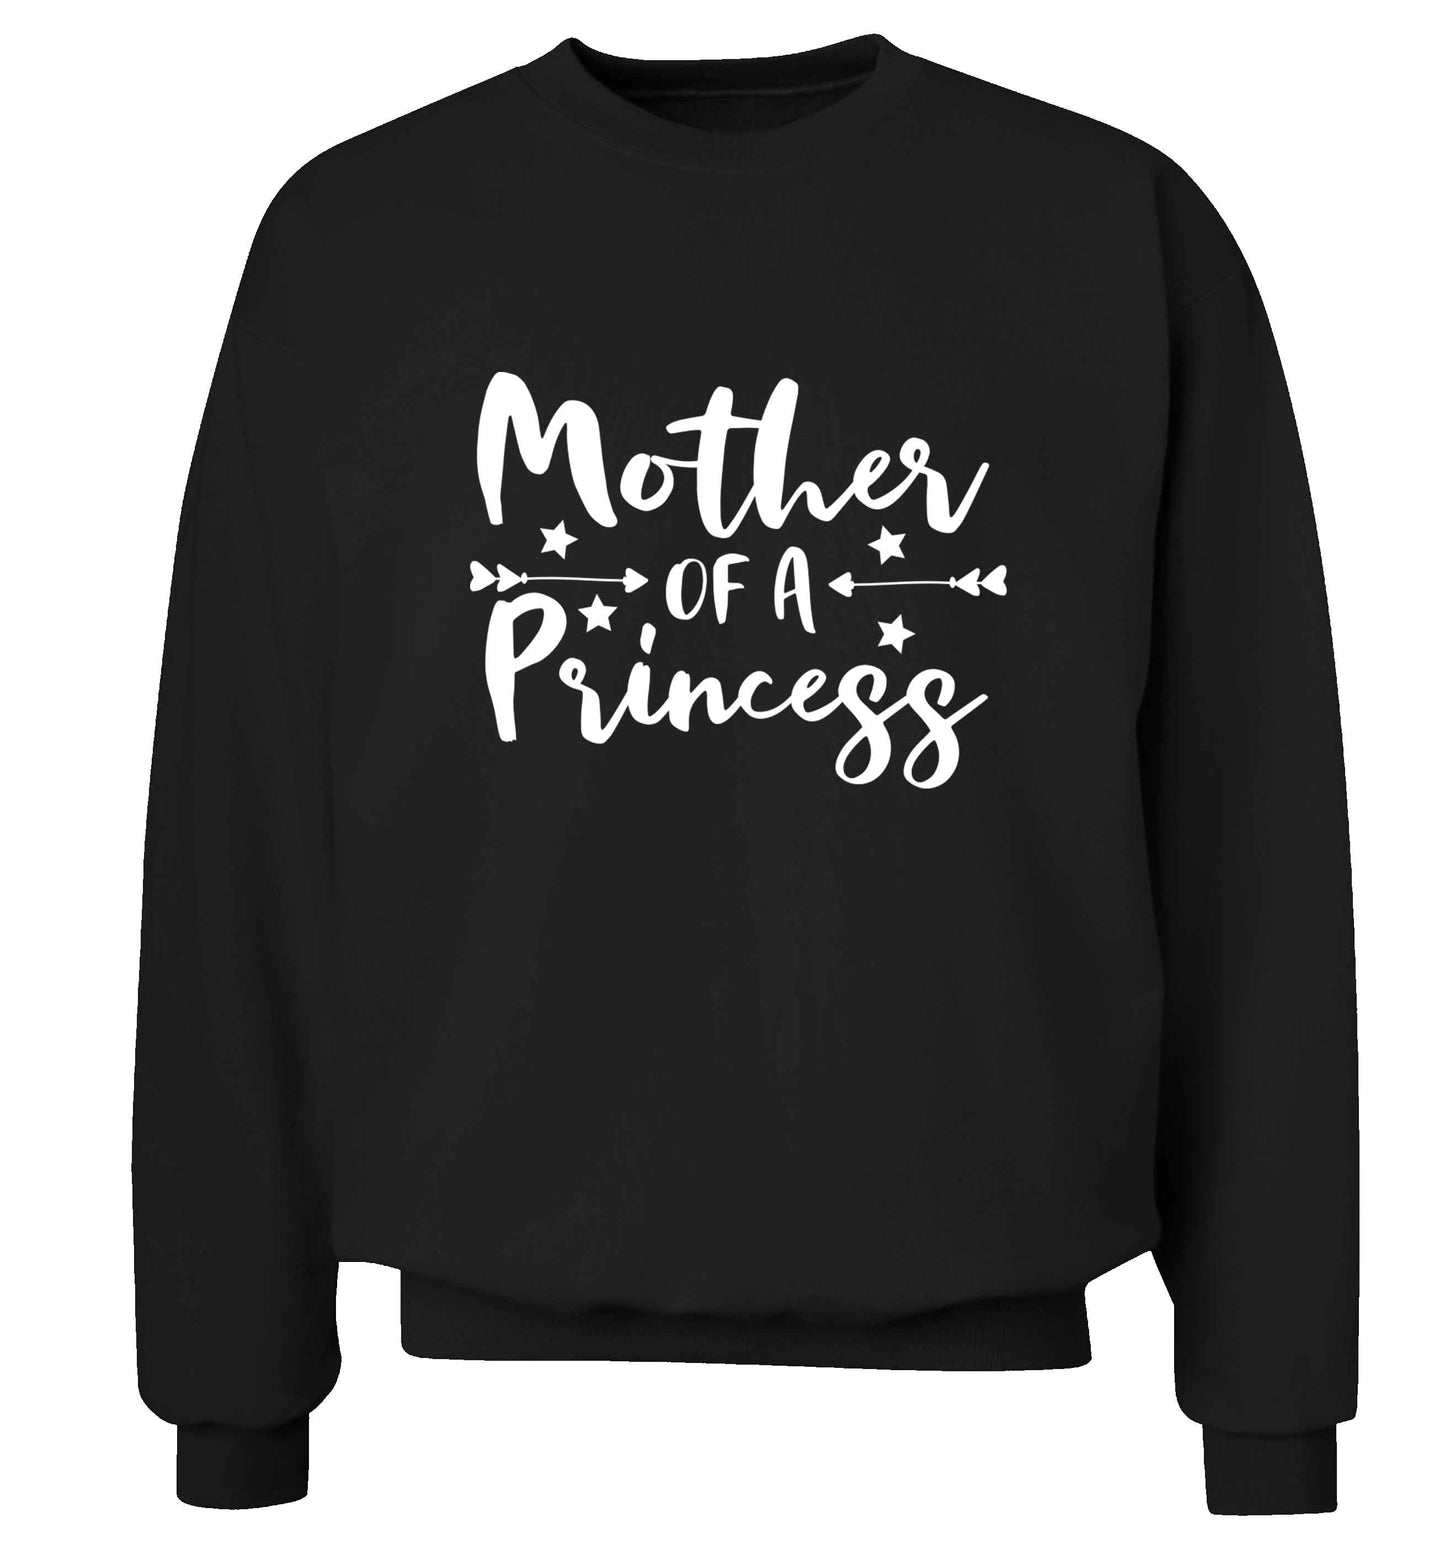 Mother of a princess adult's unisex black sweater 2XL